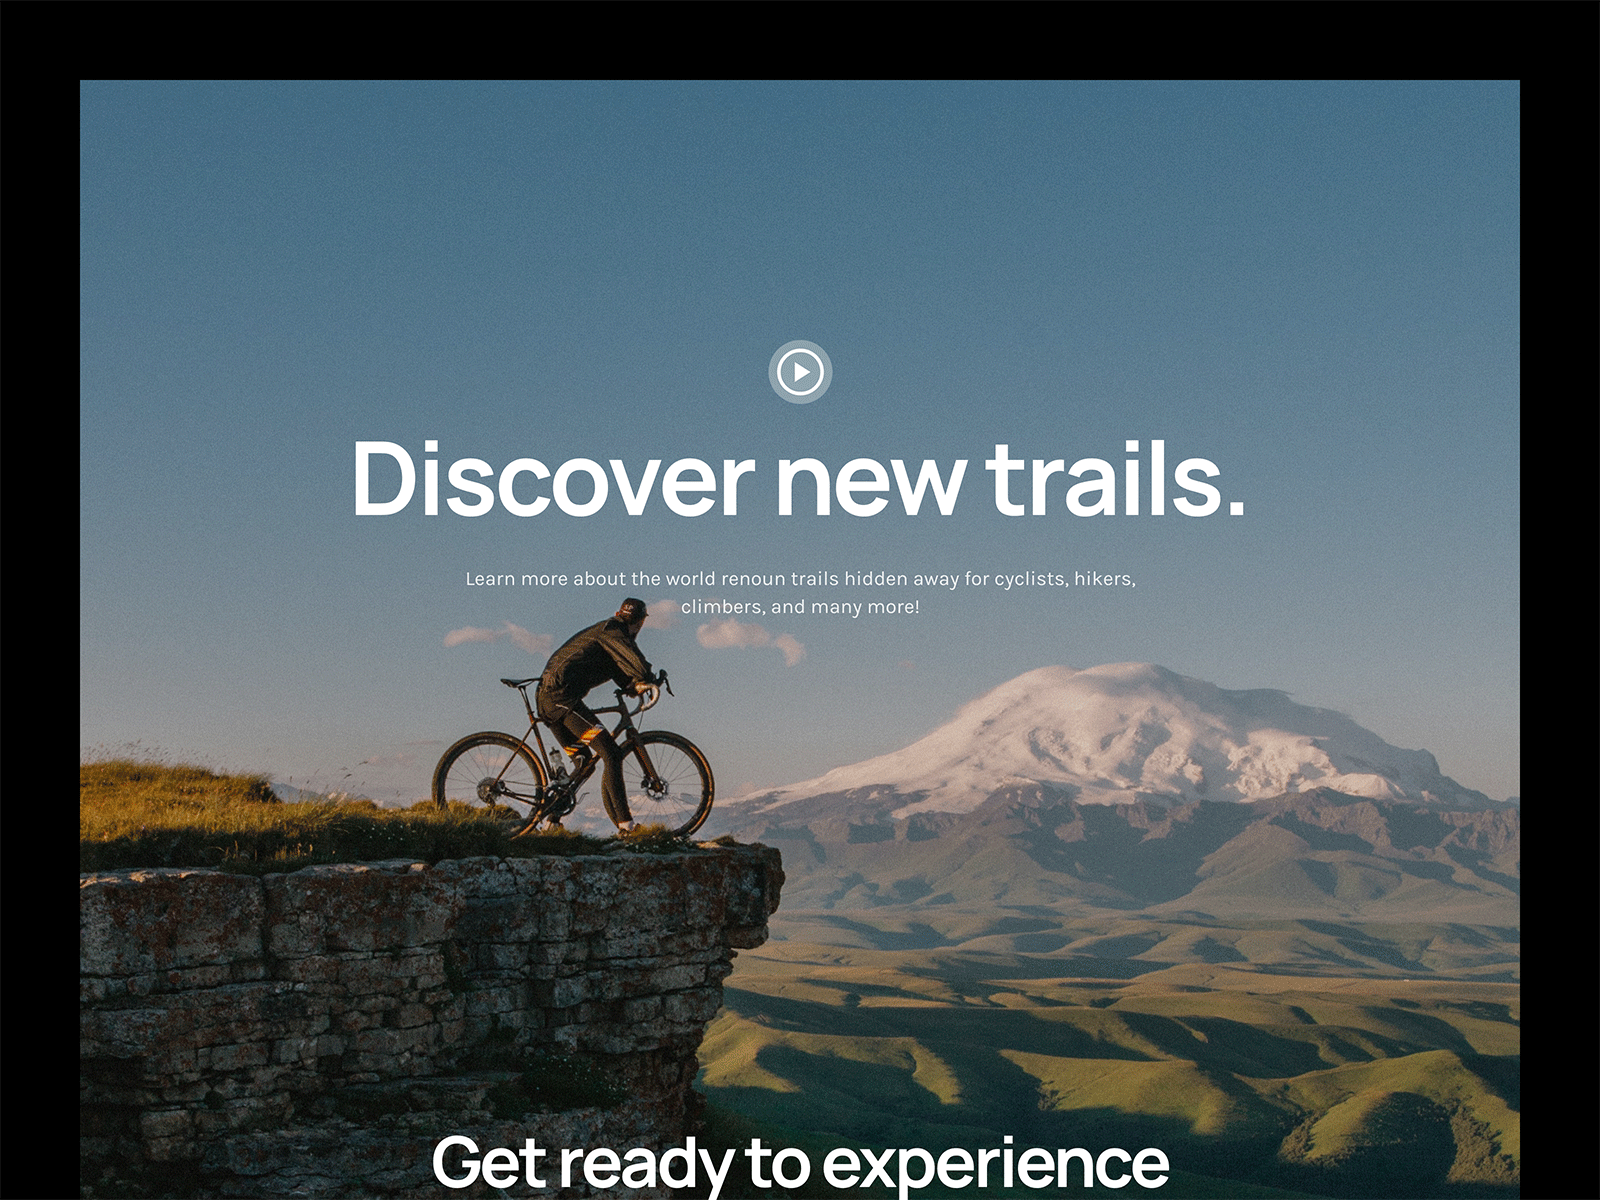 Discover New Trails - Travel Agency adventure bicycle bold camping explore hero hiking homepage landing landing page landscape minimal nature outdoors snow summer travel ui webdesign website